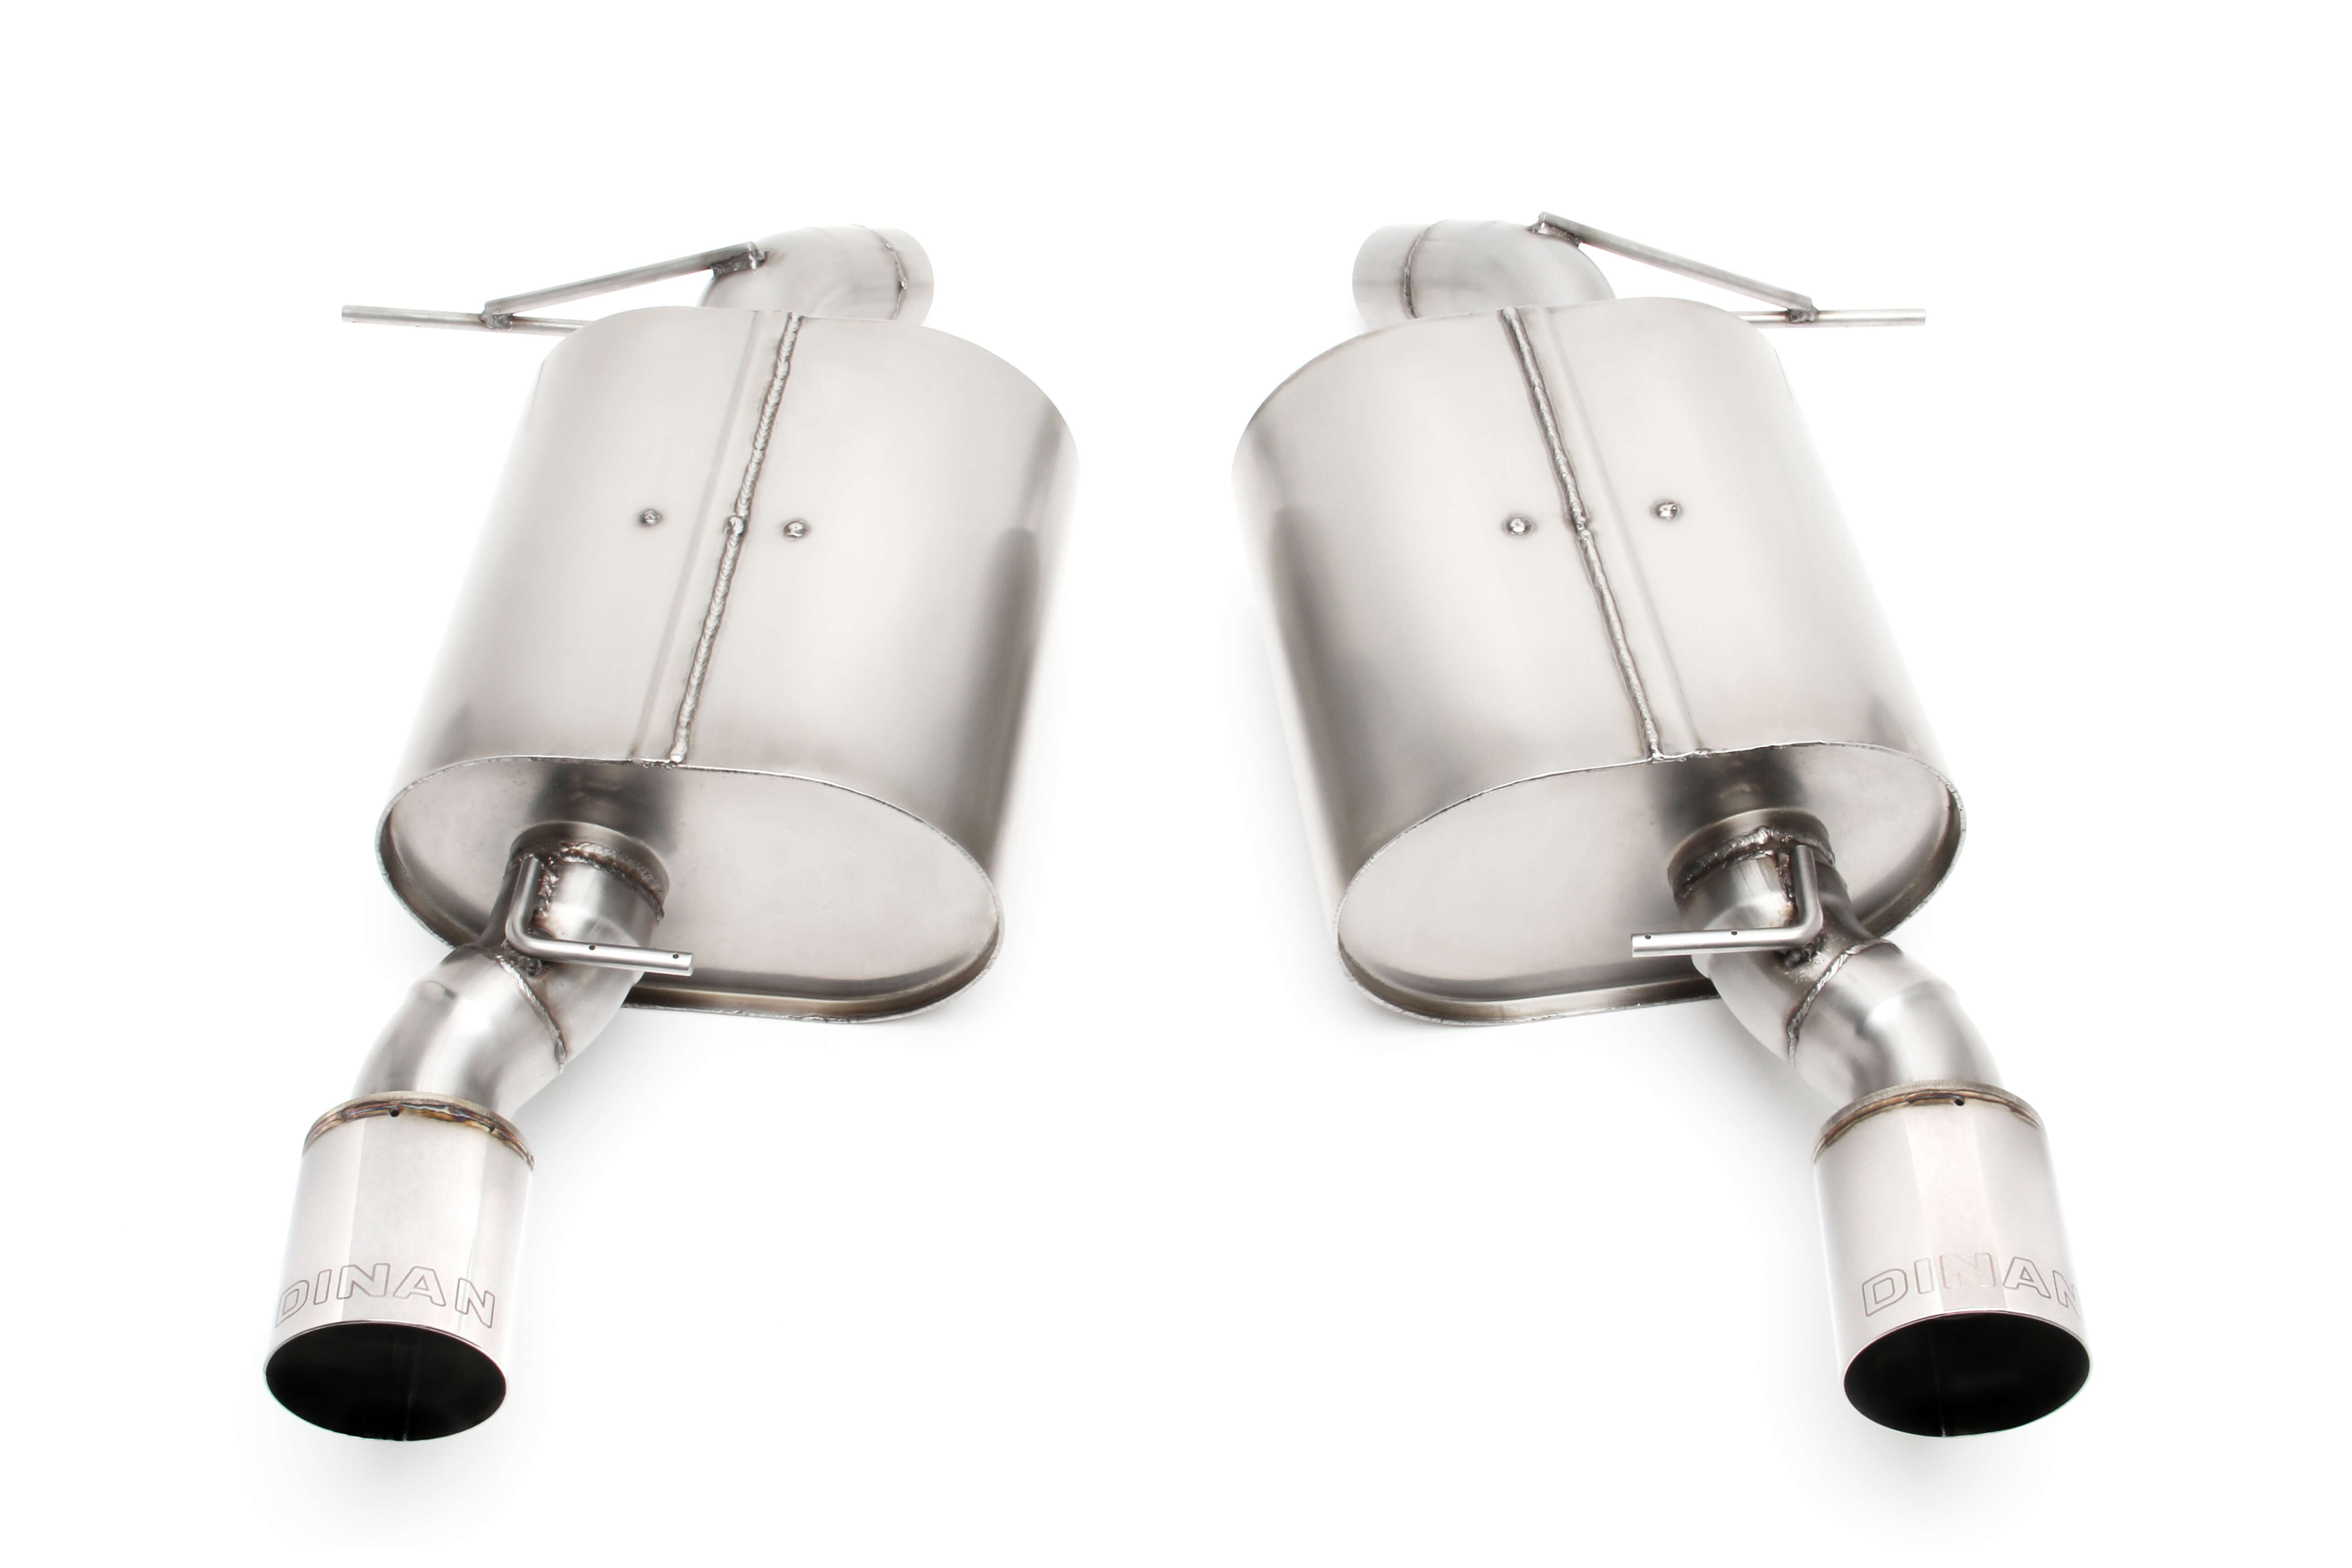 Dinan BMW (Convertible/Coupe - 3.0) Exhaust System Kit D660-0011